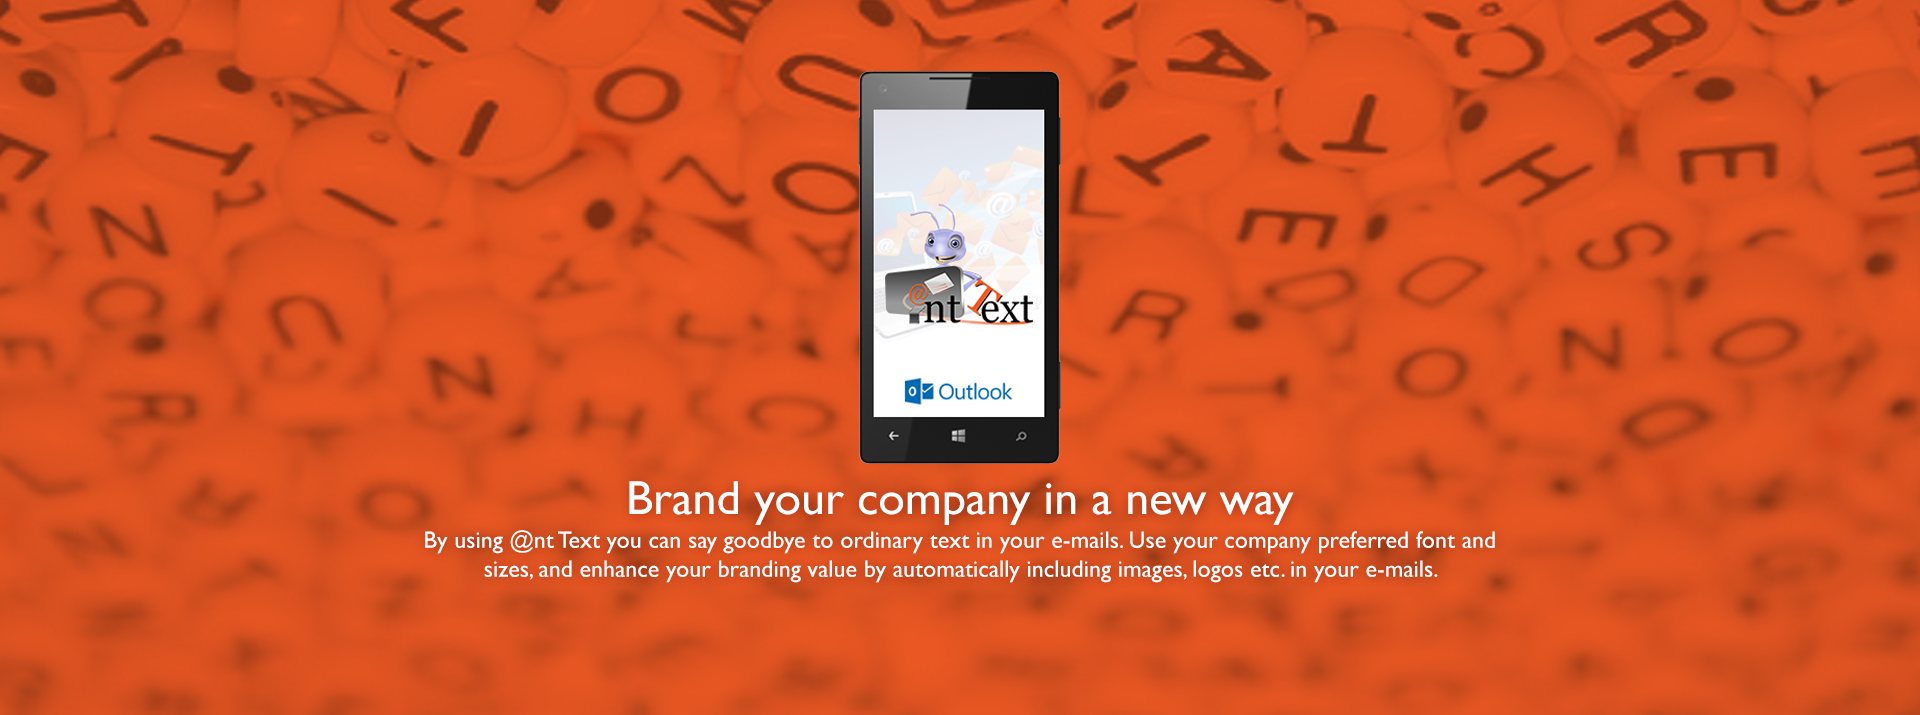 Header with mobile screen showing Ant Text logo and Outlook logo Text Brand your company in a new way